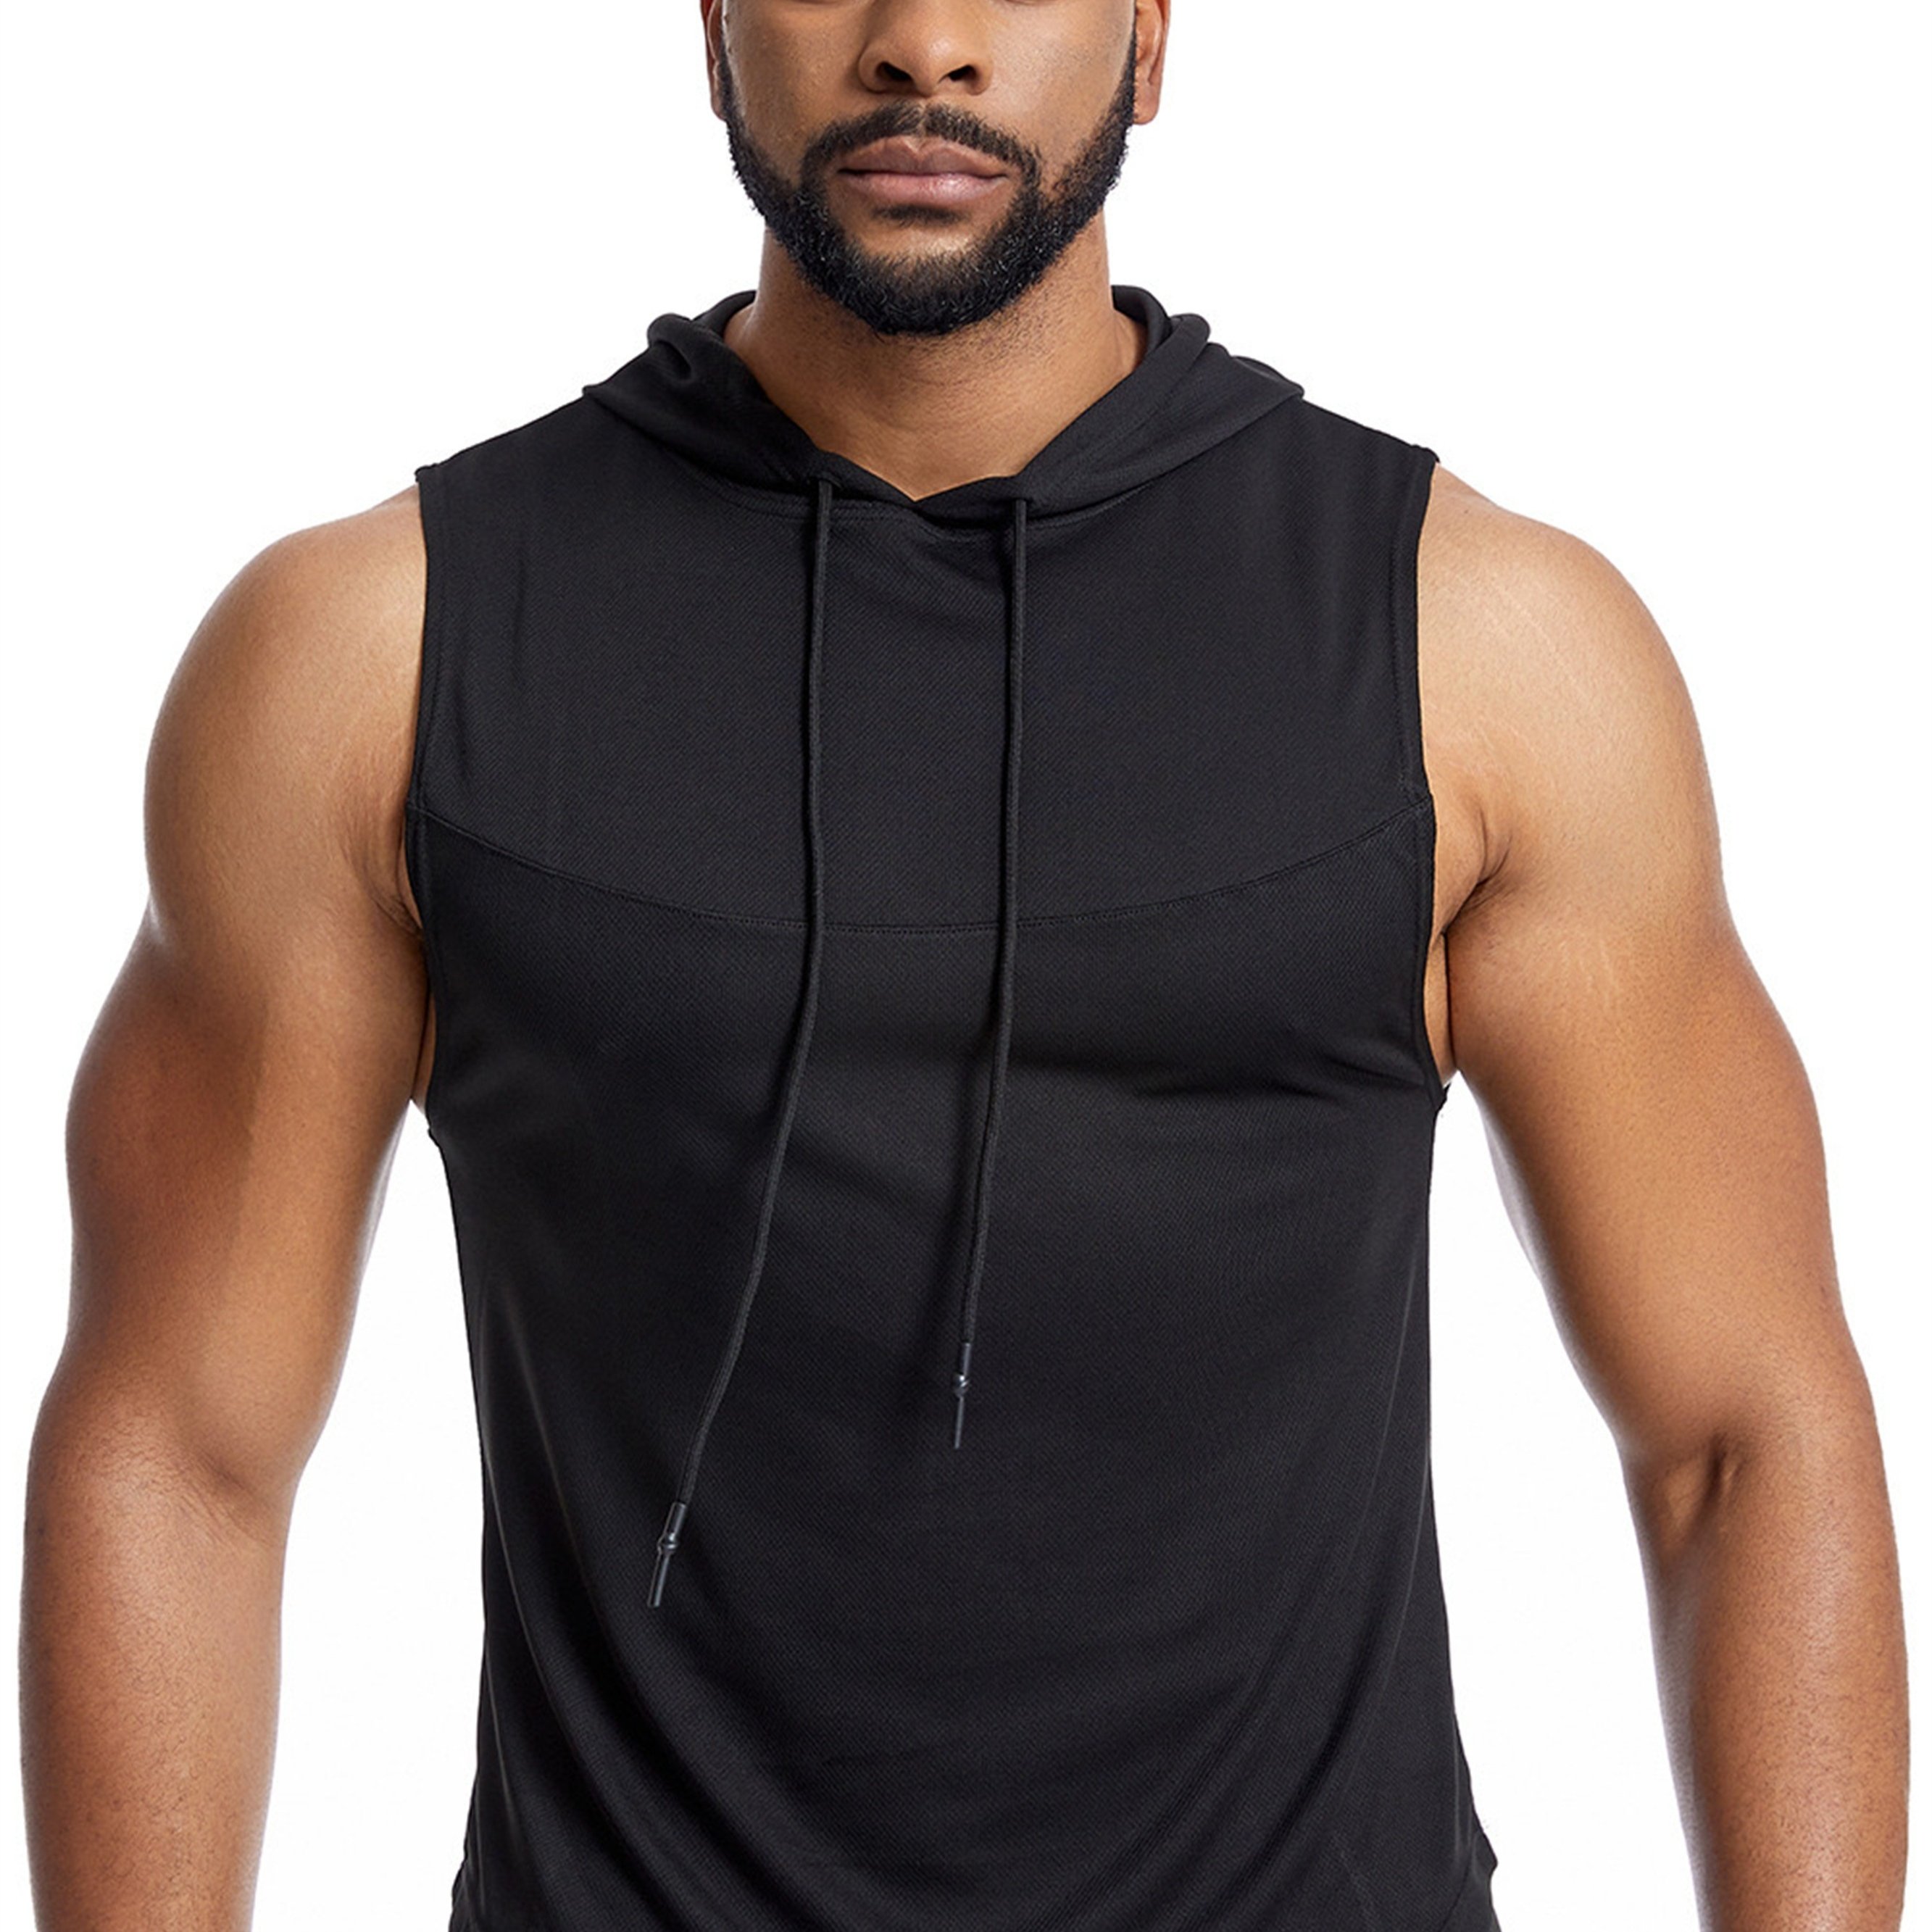 Stay Cool and Stylish This Summer with Men's Casual Round Neck Hooded Tank Top!